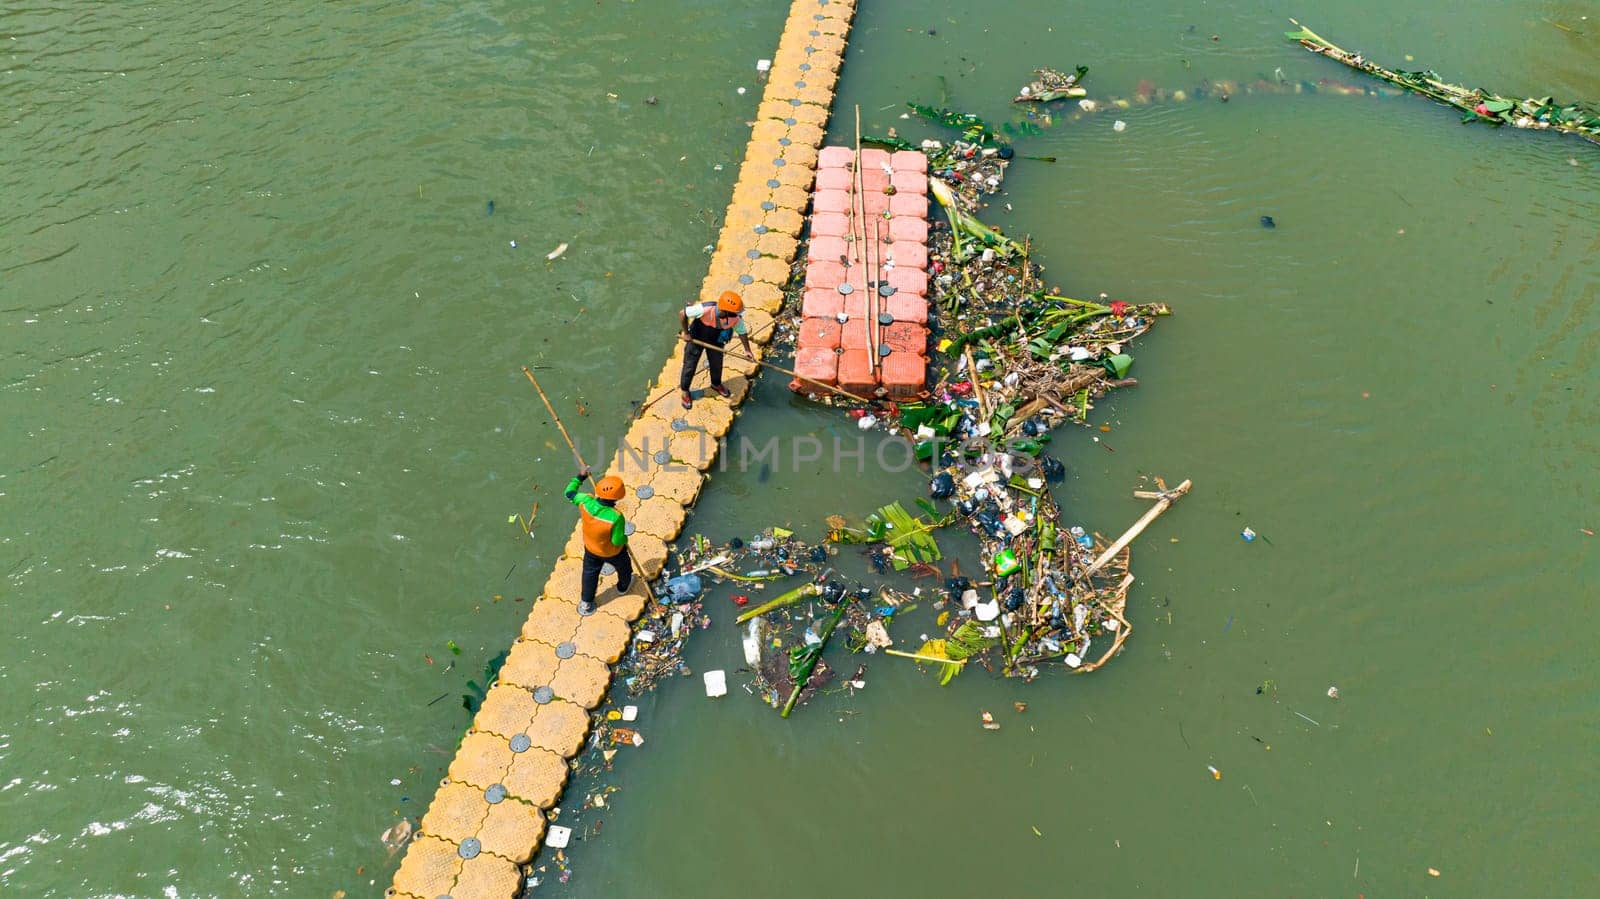 Jakarta, Indonesia - October 11, 2022: workers clean up a river of debris in Jakarta. Indonesia.